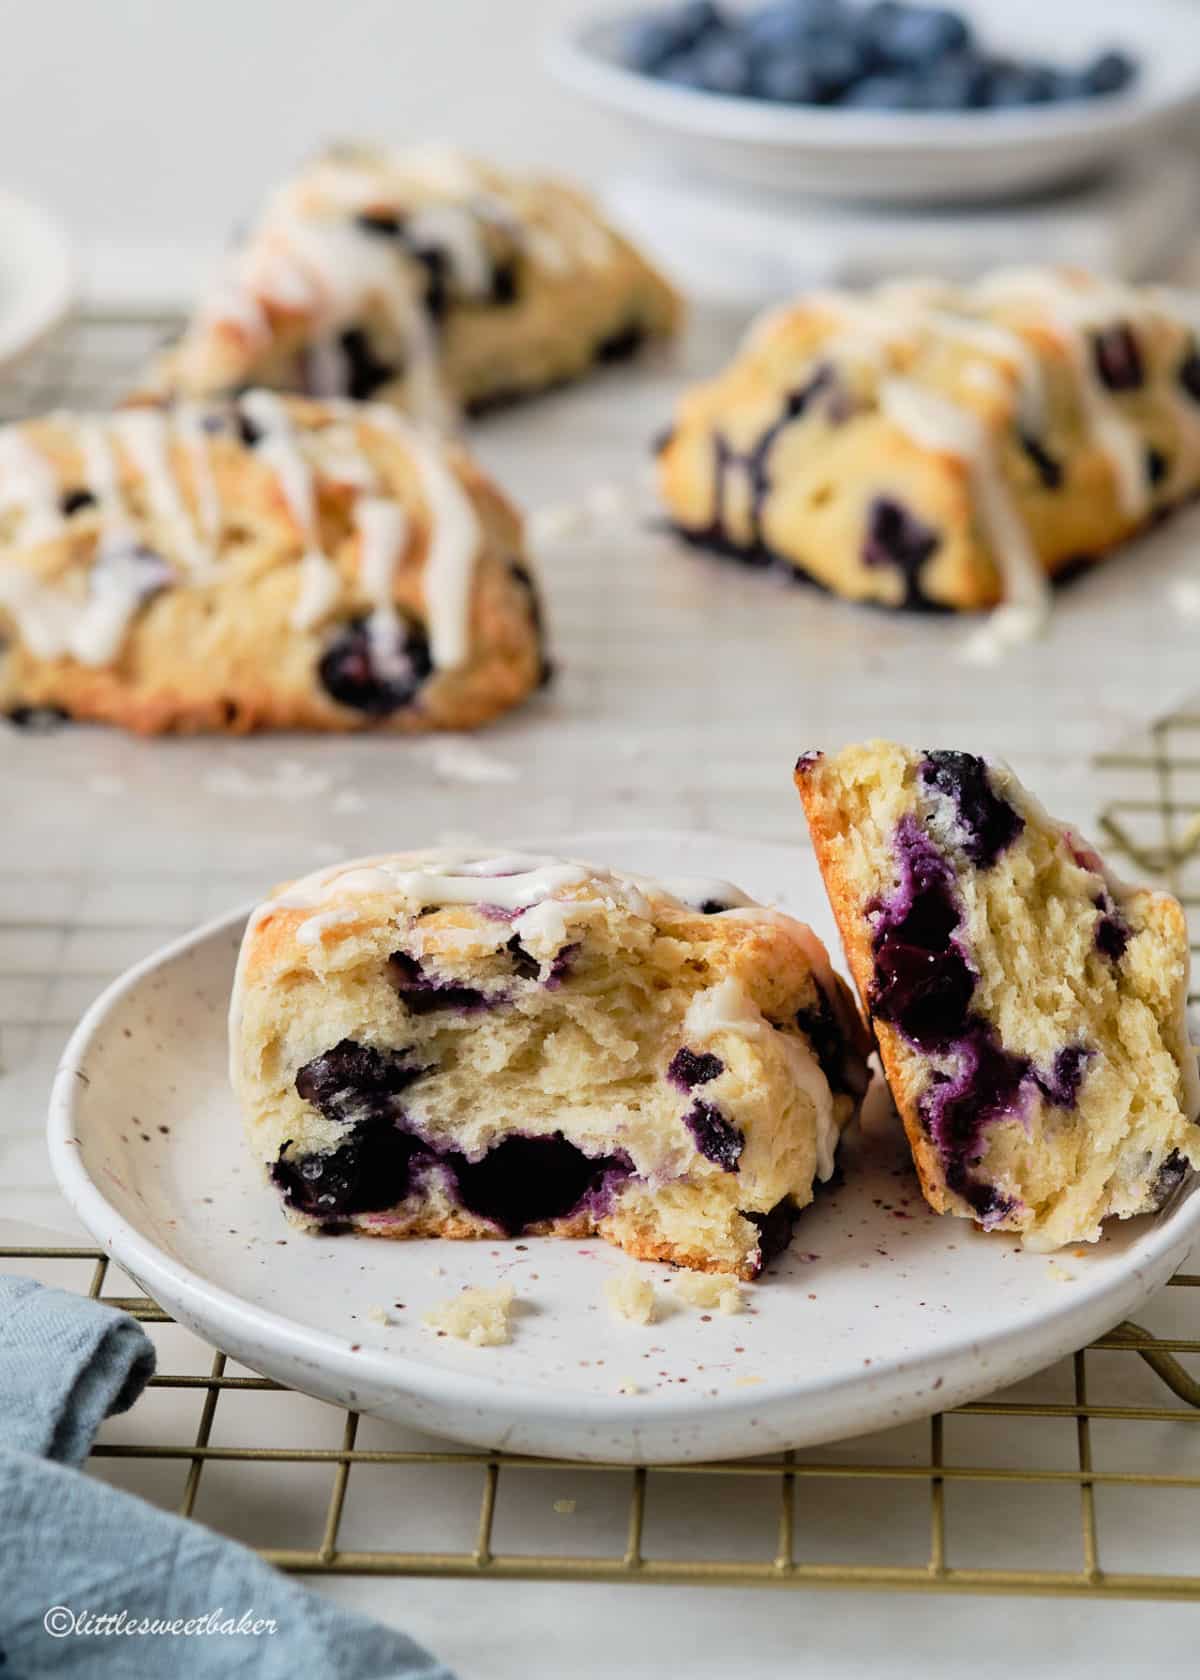 A blueberry scone broken in half on a speckled plate.